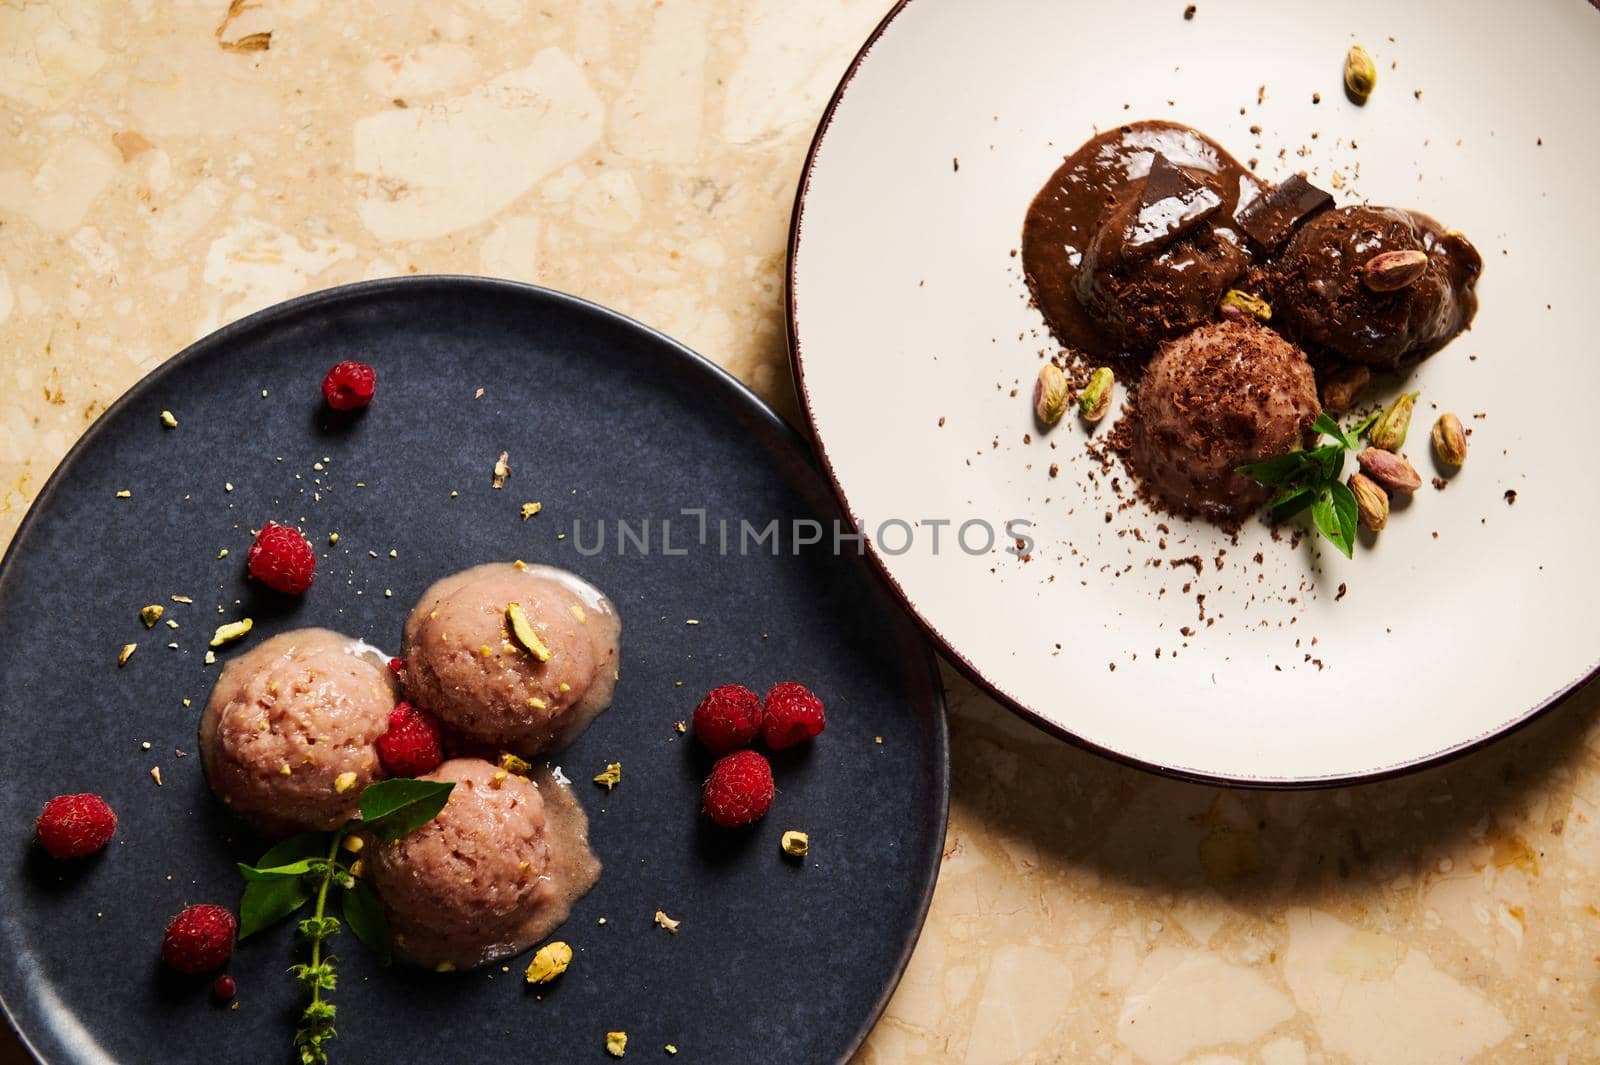 Flat lay of ceramic plates with scoops of refreshing raw vegan ice cream, topped with raspberries and lemon basil leaves and chocolate dairy free sorbet, on a marble table background. Food still life